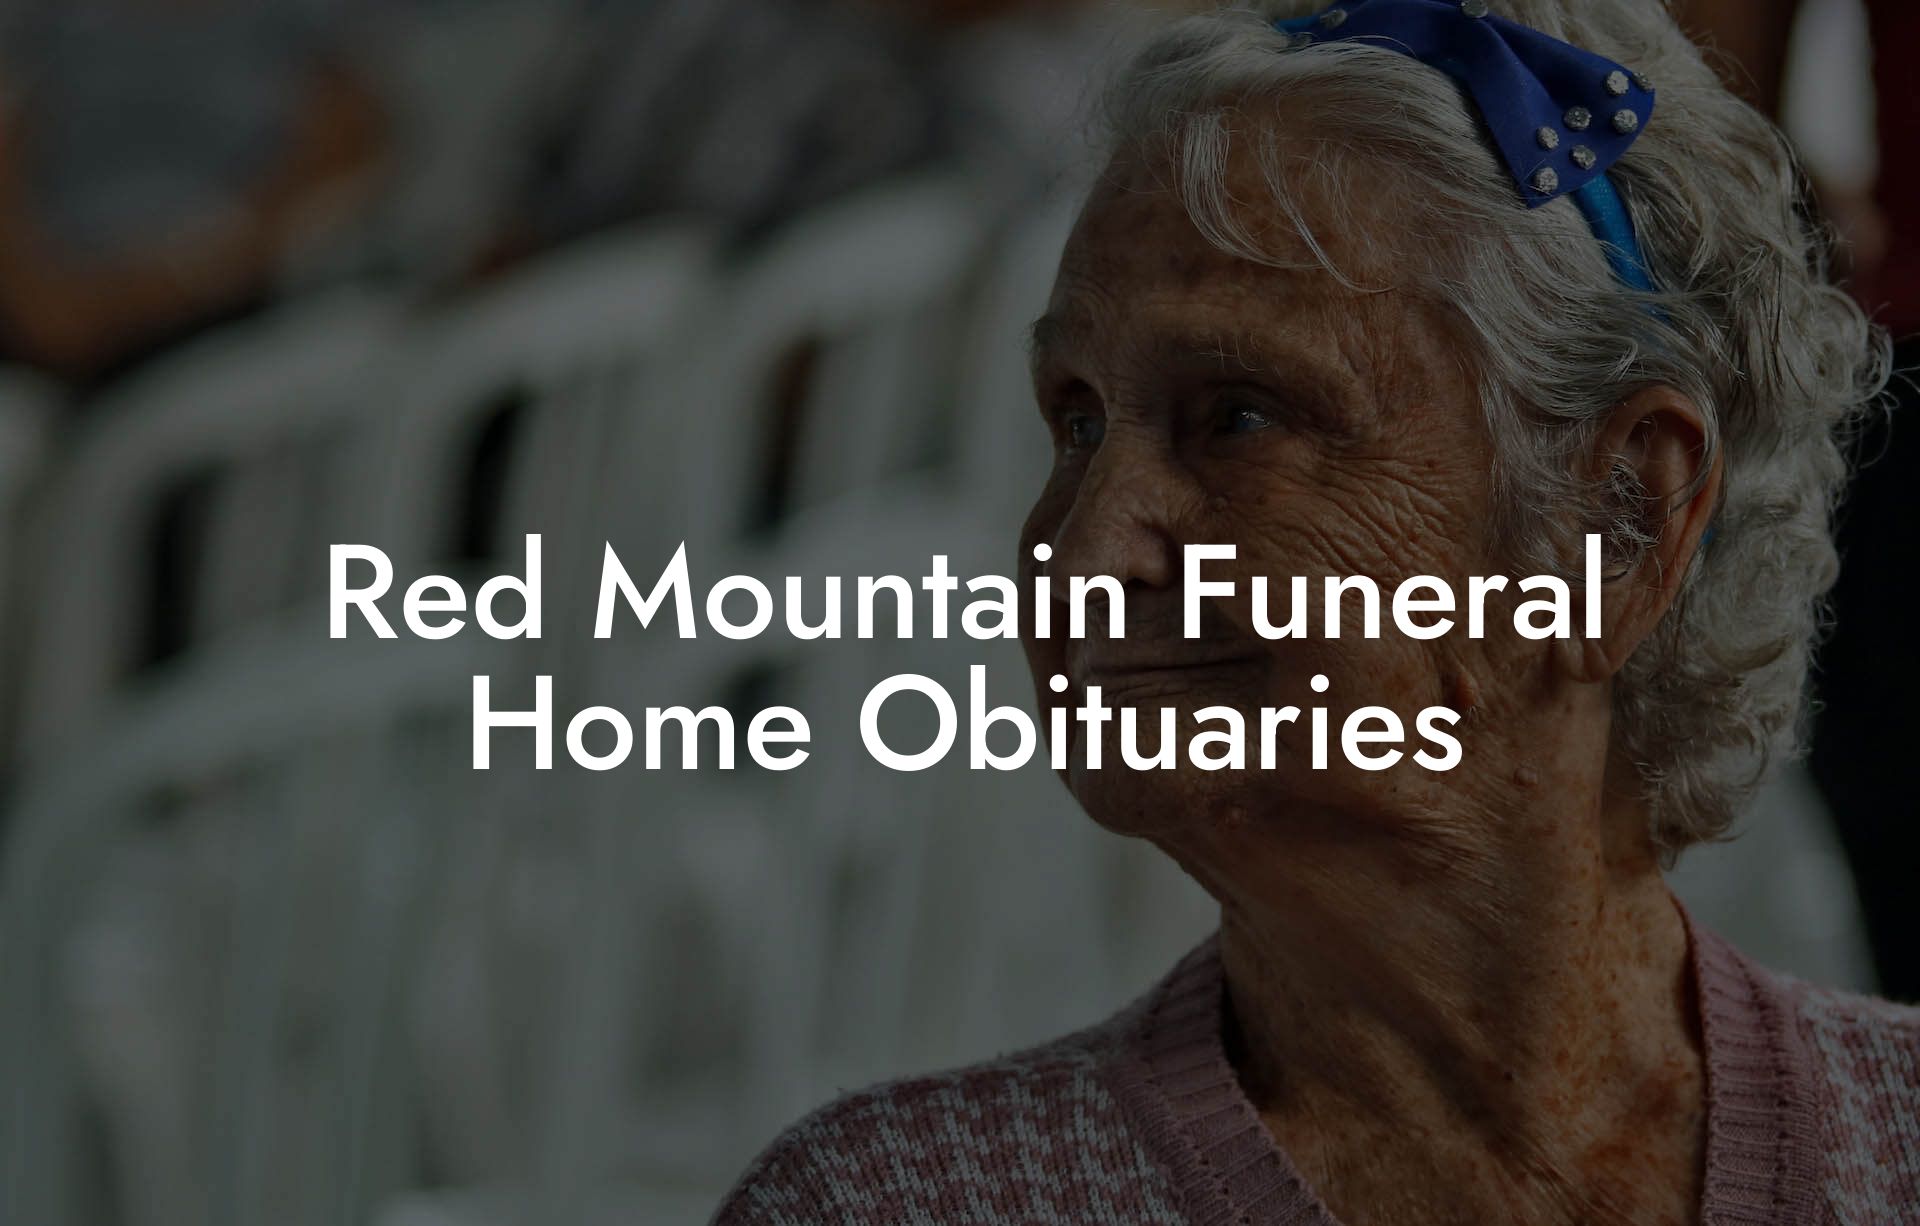 Red Mountain Funeral Home Obituaries